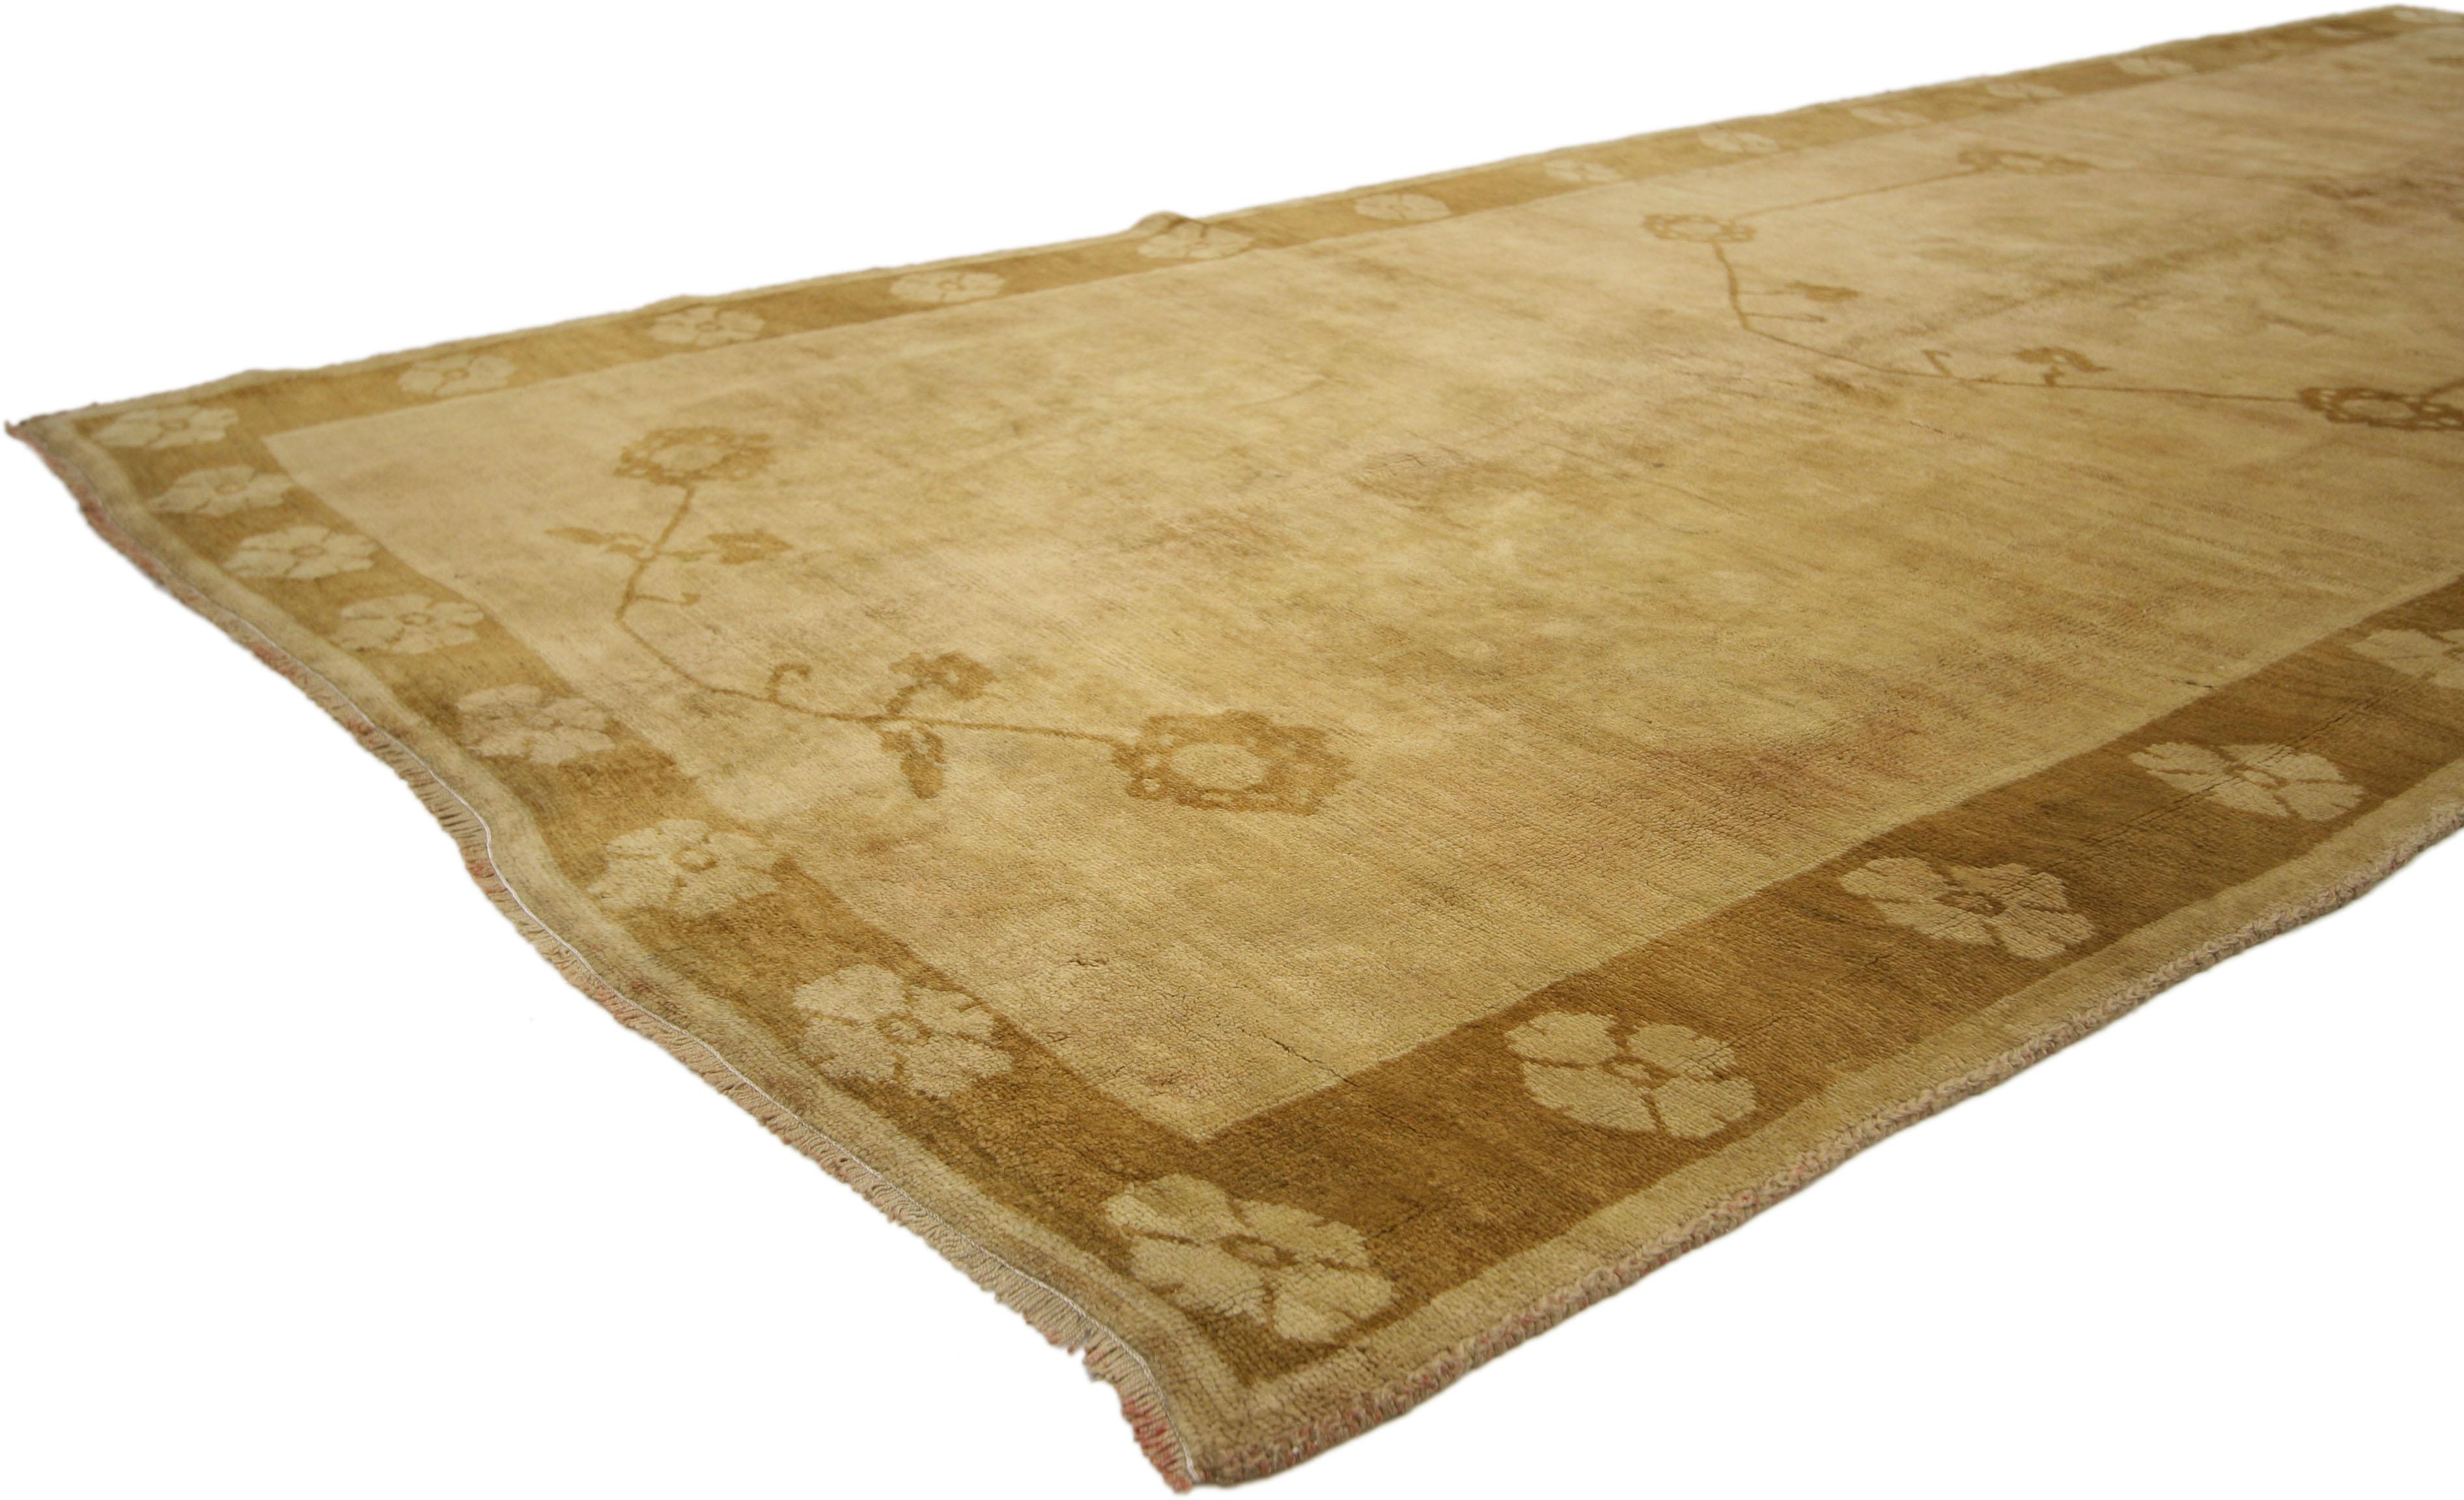 50435 Vintage Turkish Oushak Runner, Warm, Neutral Color Hallway Runner, 05'00 x 11'05. This hand-knotted wool vintage Turkish Oushak carpet runner features a traditional modern style in warm, neutral colors. A simple centre medallion and two